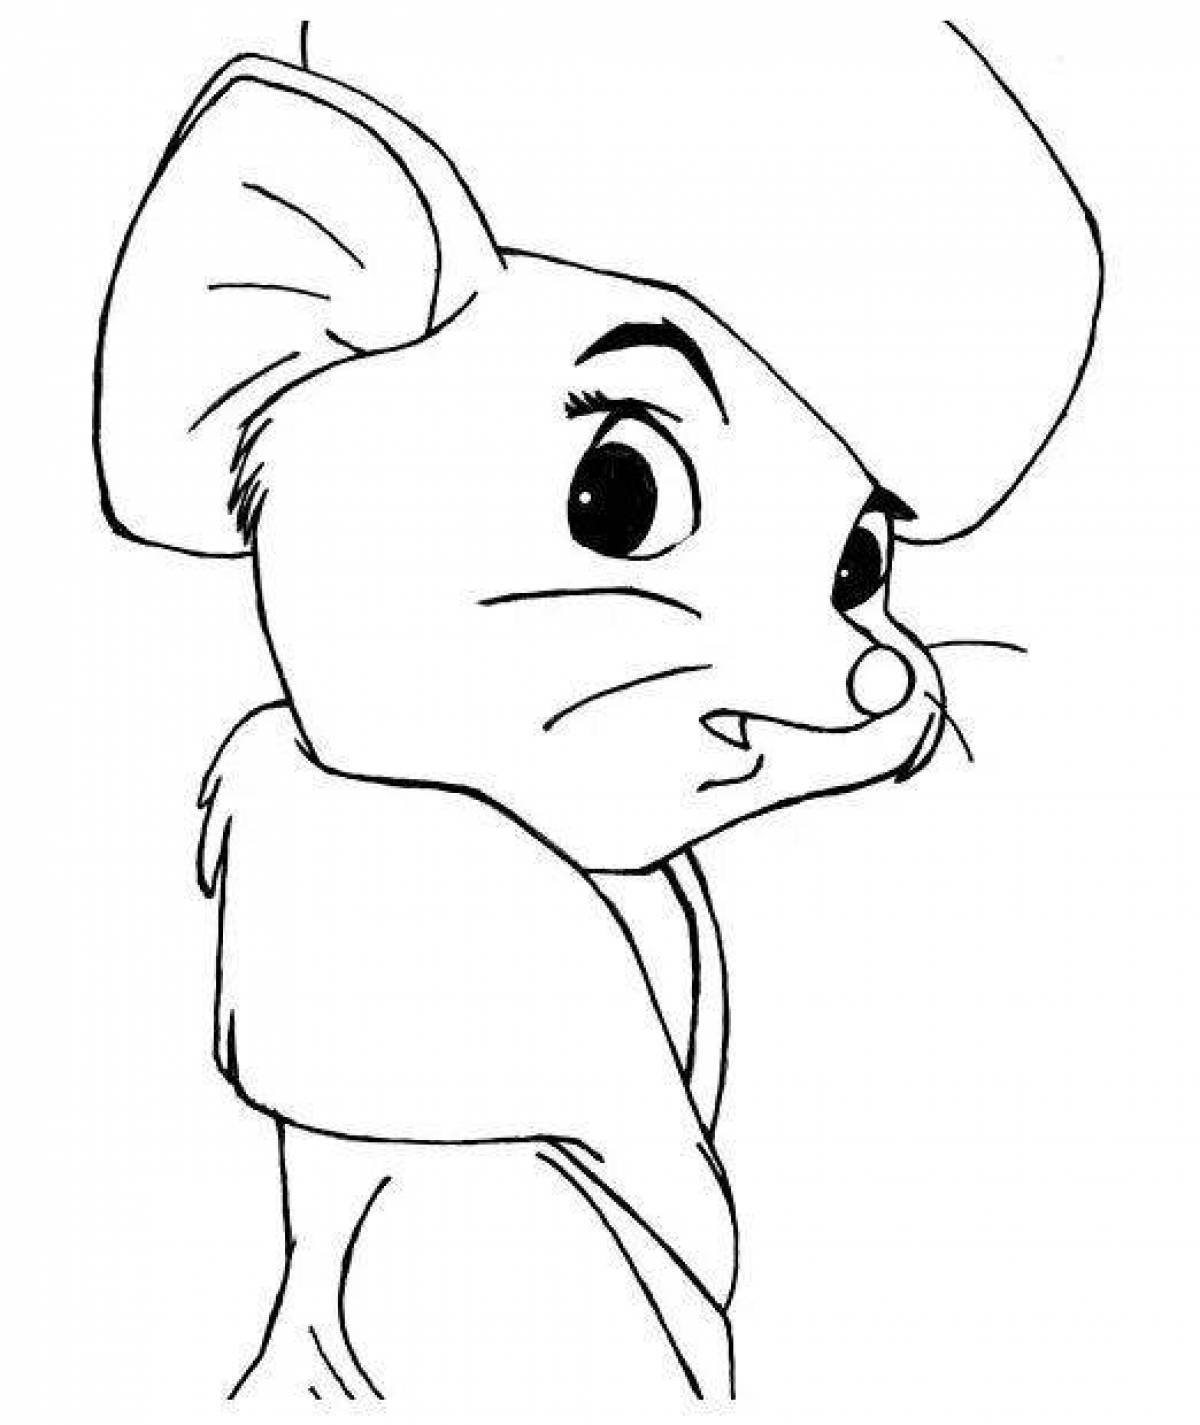 Coloring page charming bianca